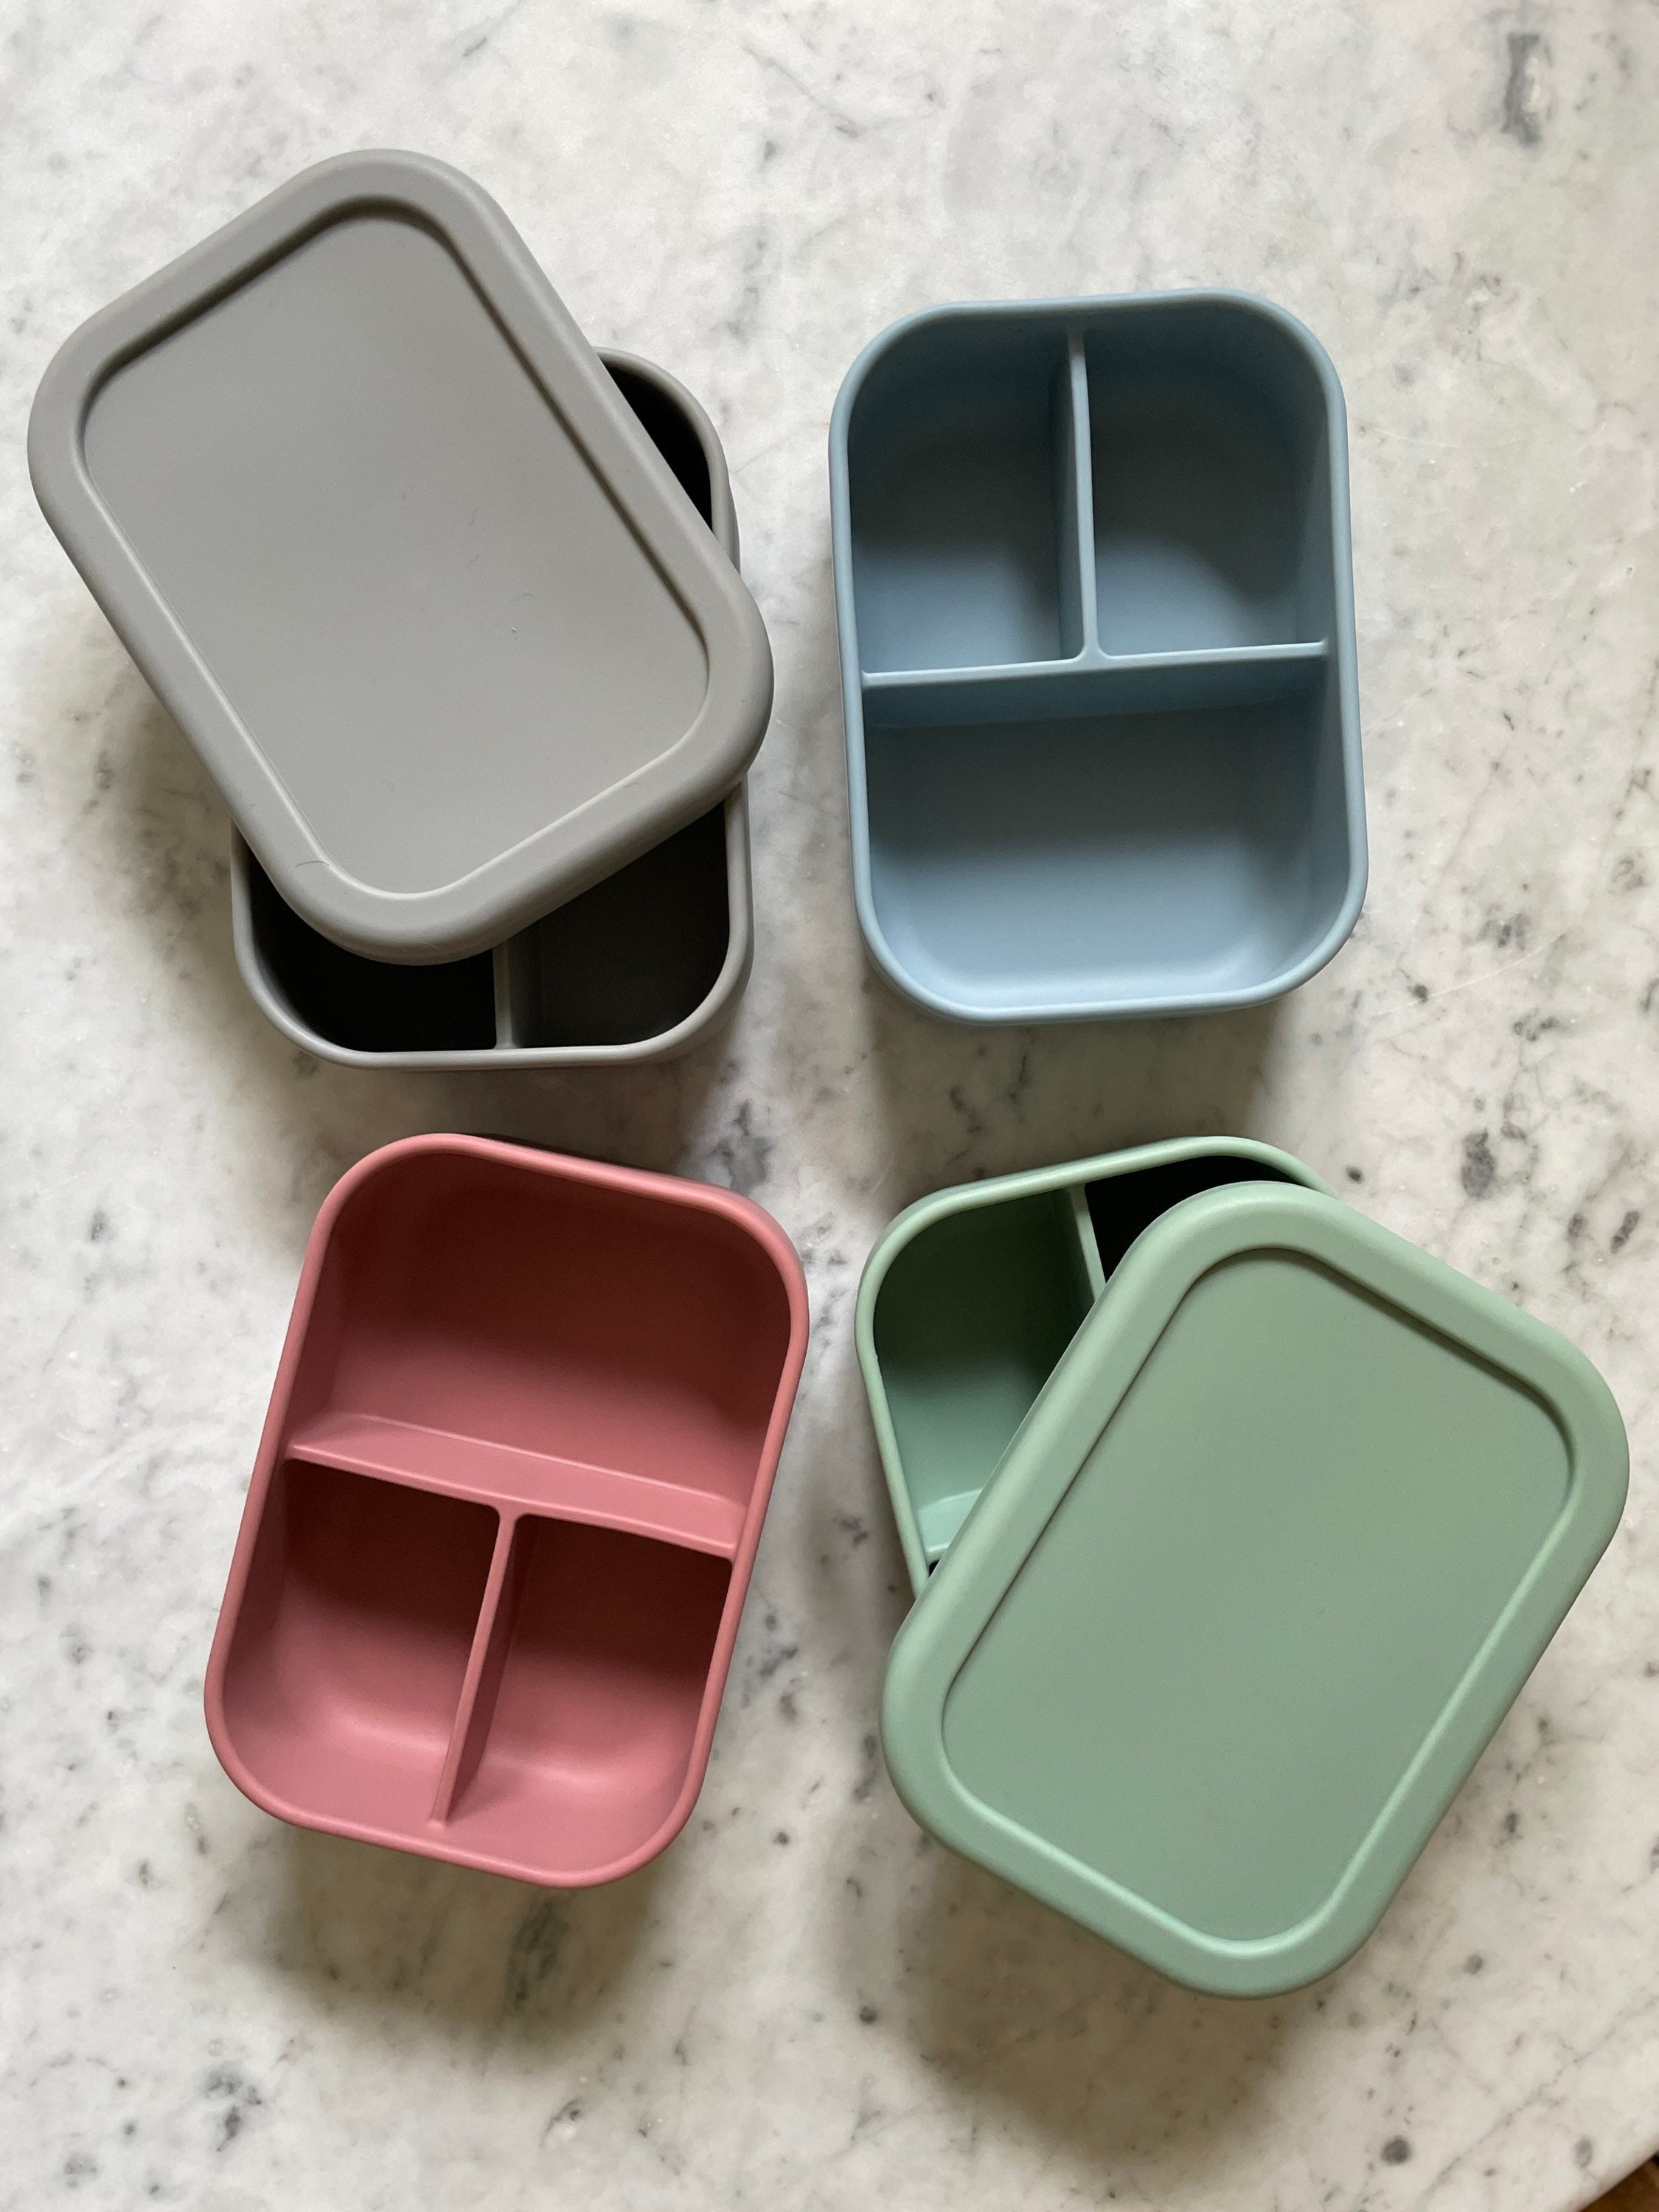 Keweis Silicone Bento Box, 3-Compartment 25oz Lunch Box Container